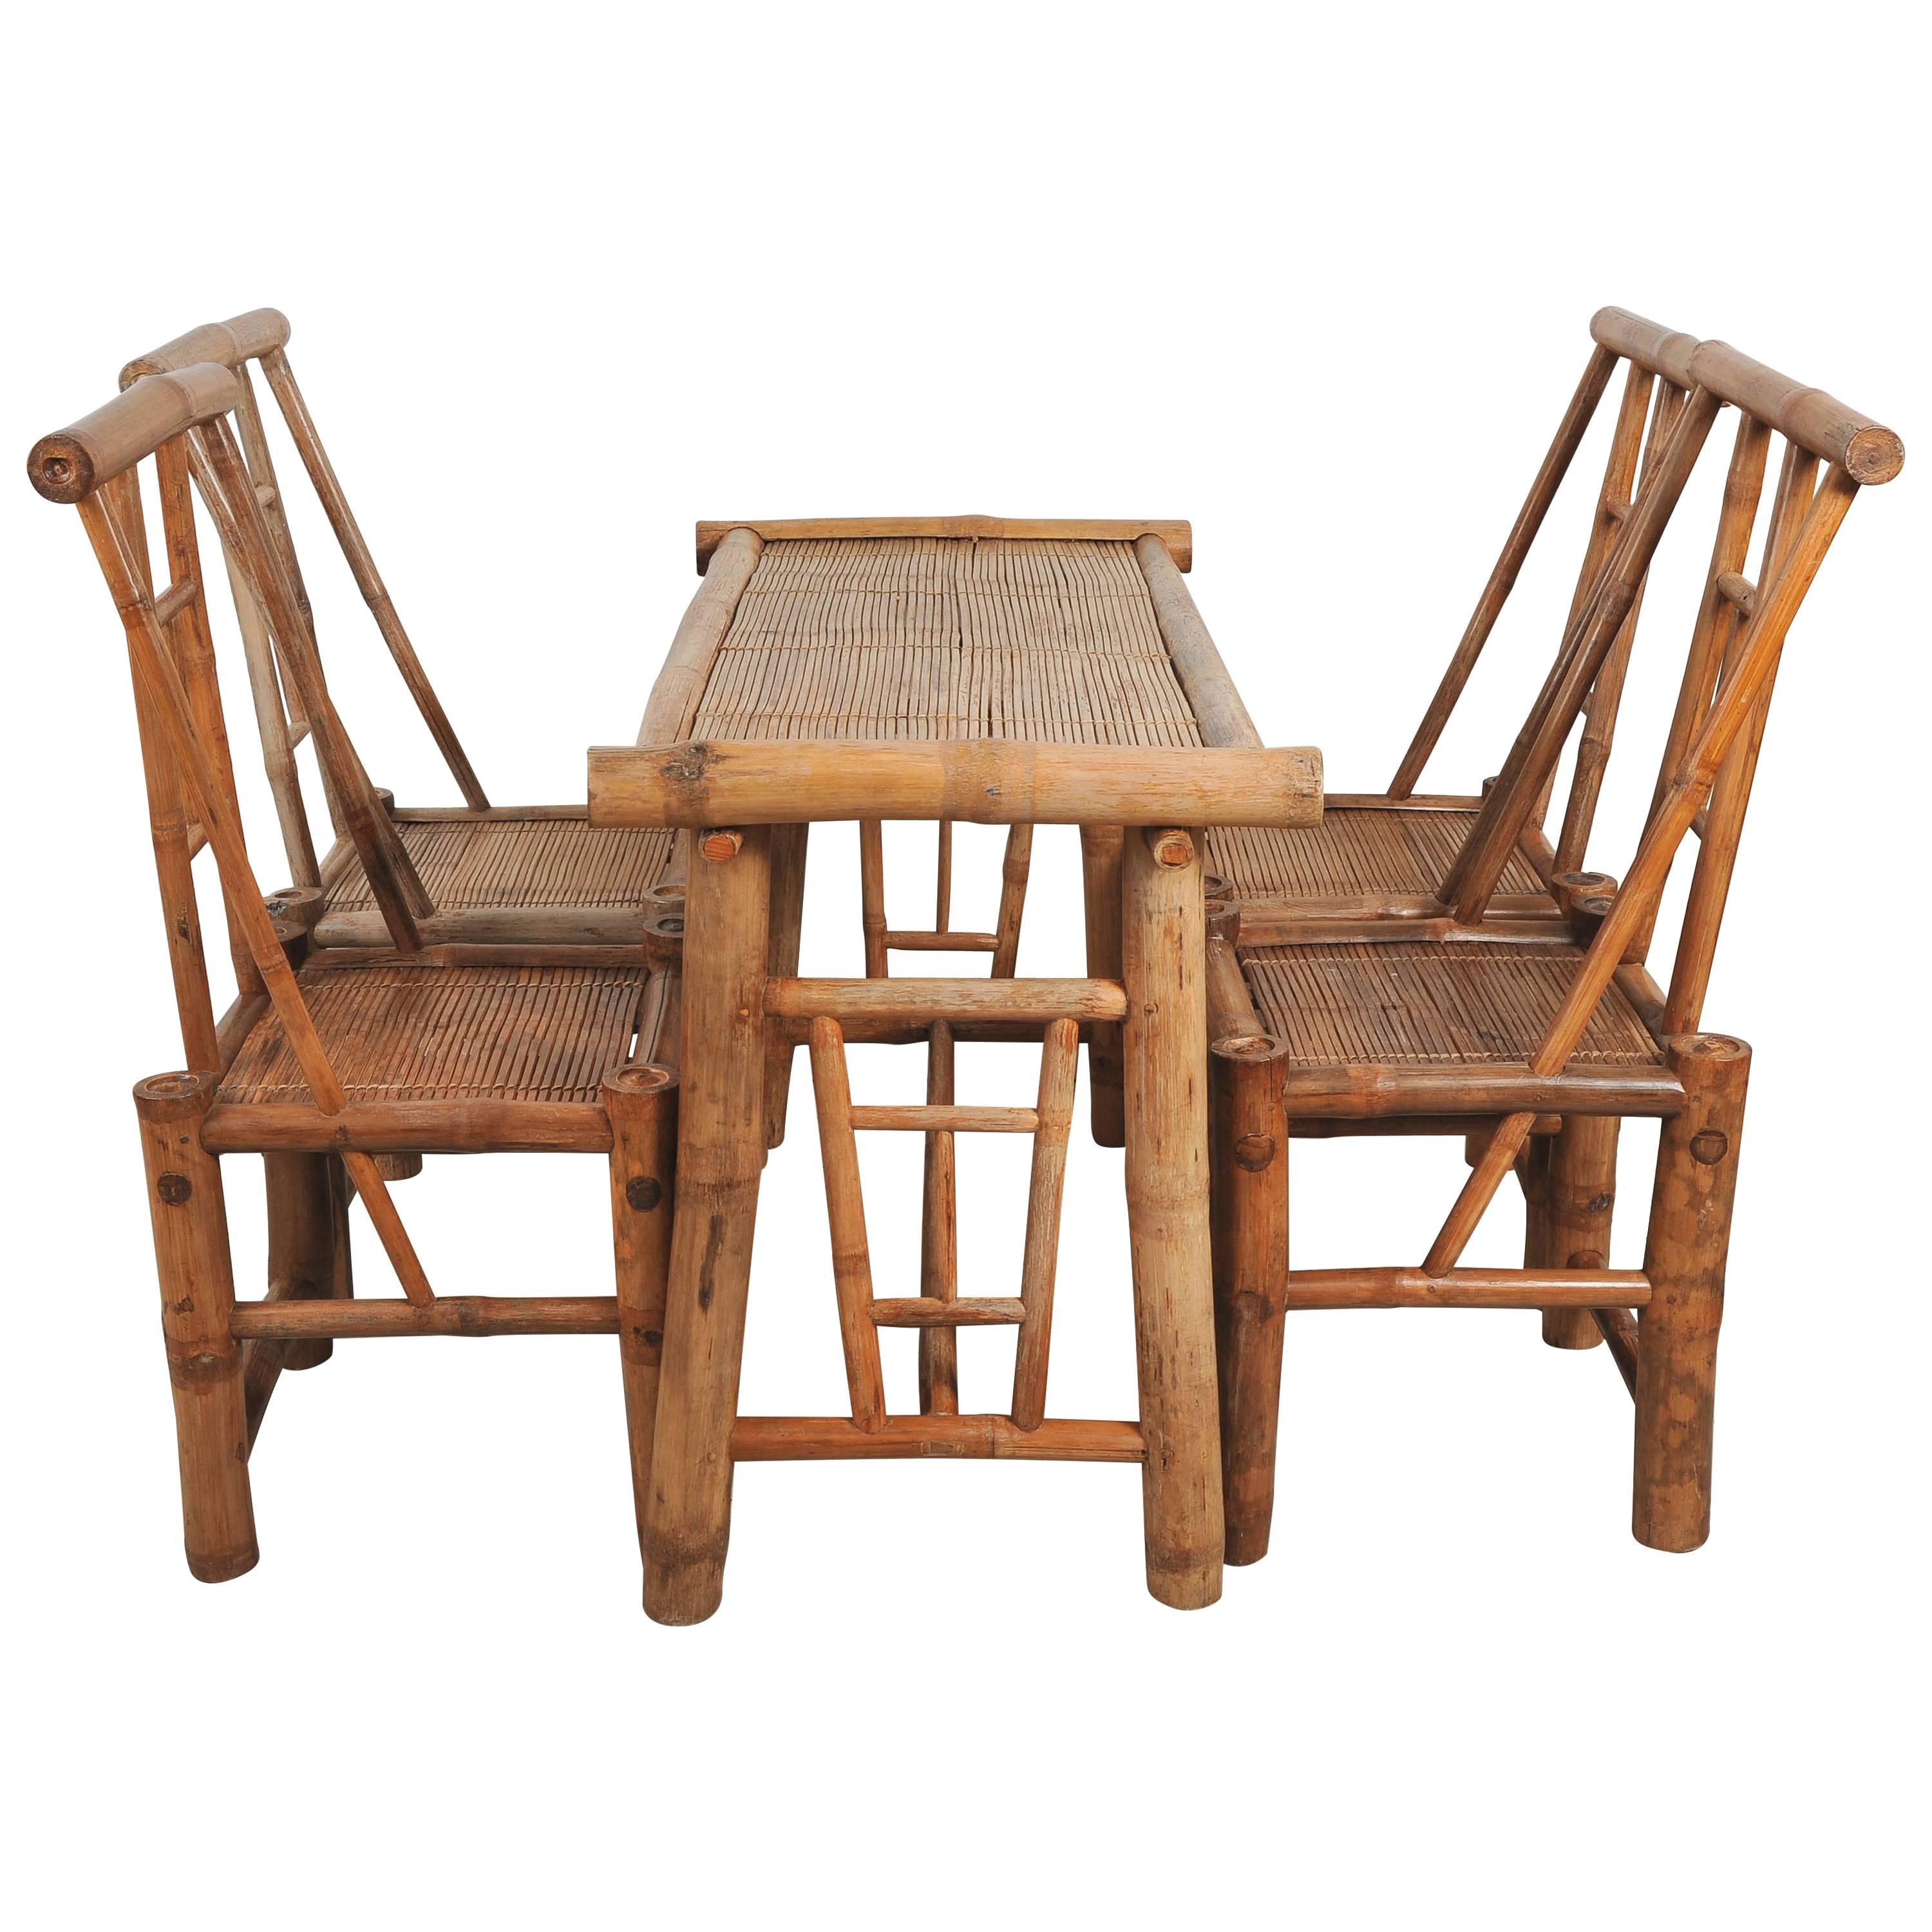 Quirky French 1950s Set of Bamboo and Rattan Table with Four Chairs